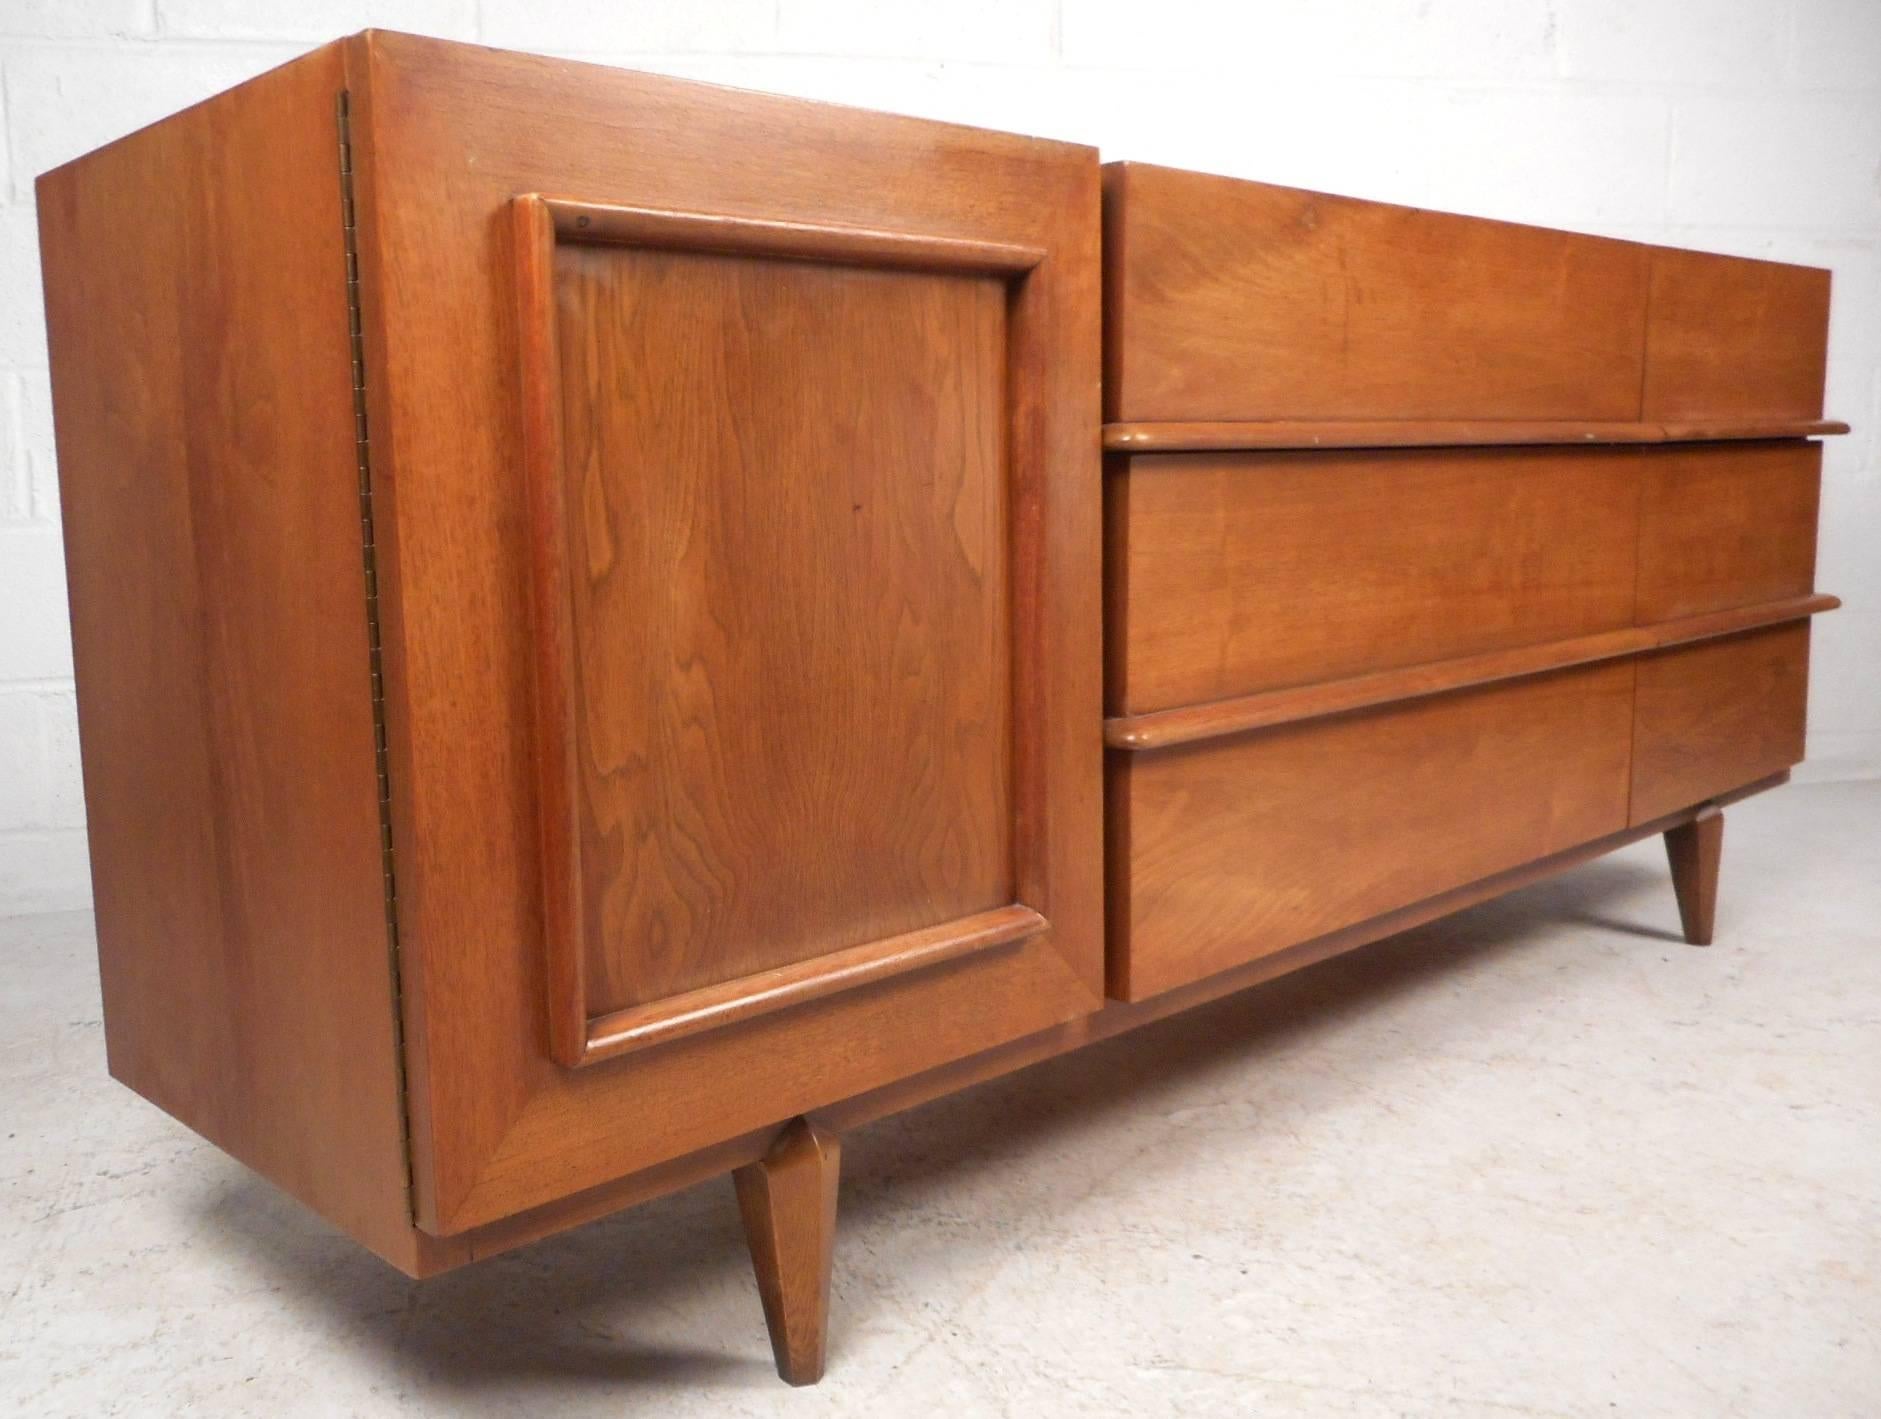 This stunning vintage modern bedroom set comes with a low dresser, a highboy, and two night stands. Stylish design with an over abundance of storage space within its many drawers. Unique low dresser has a cabinet door with an unusual embossed square